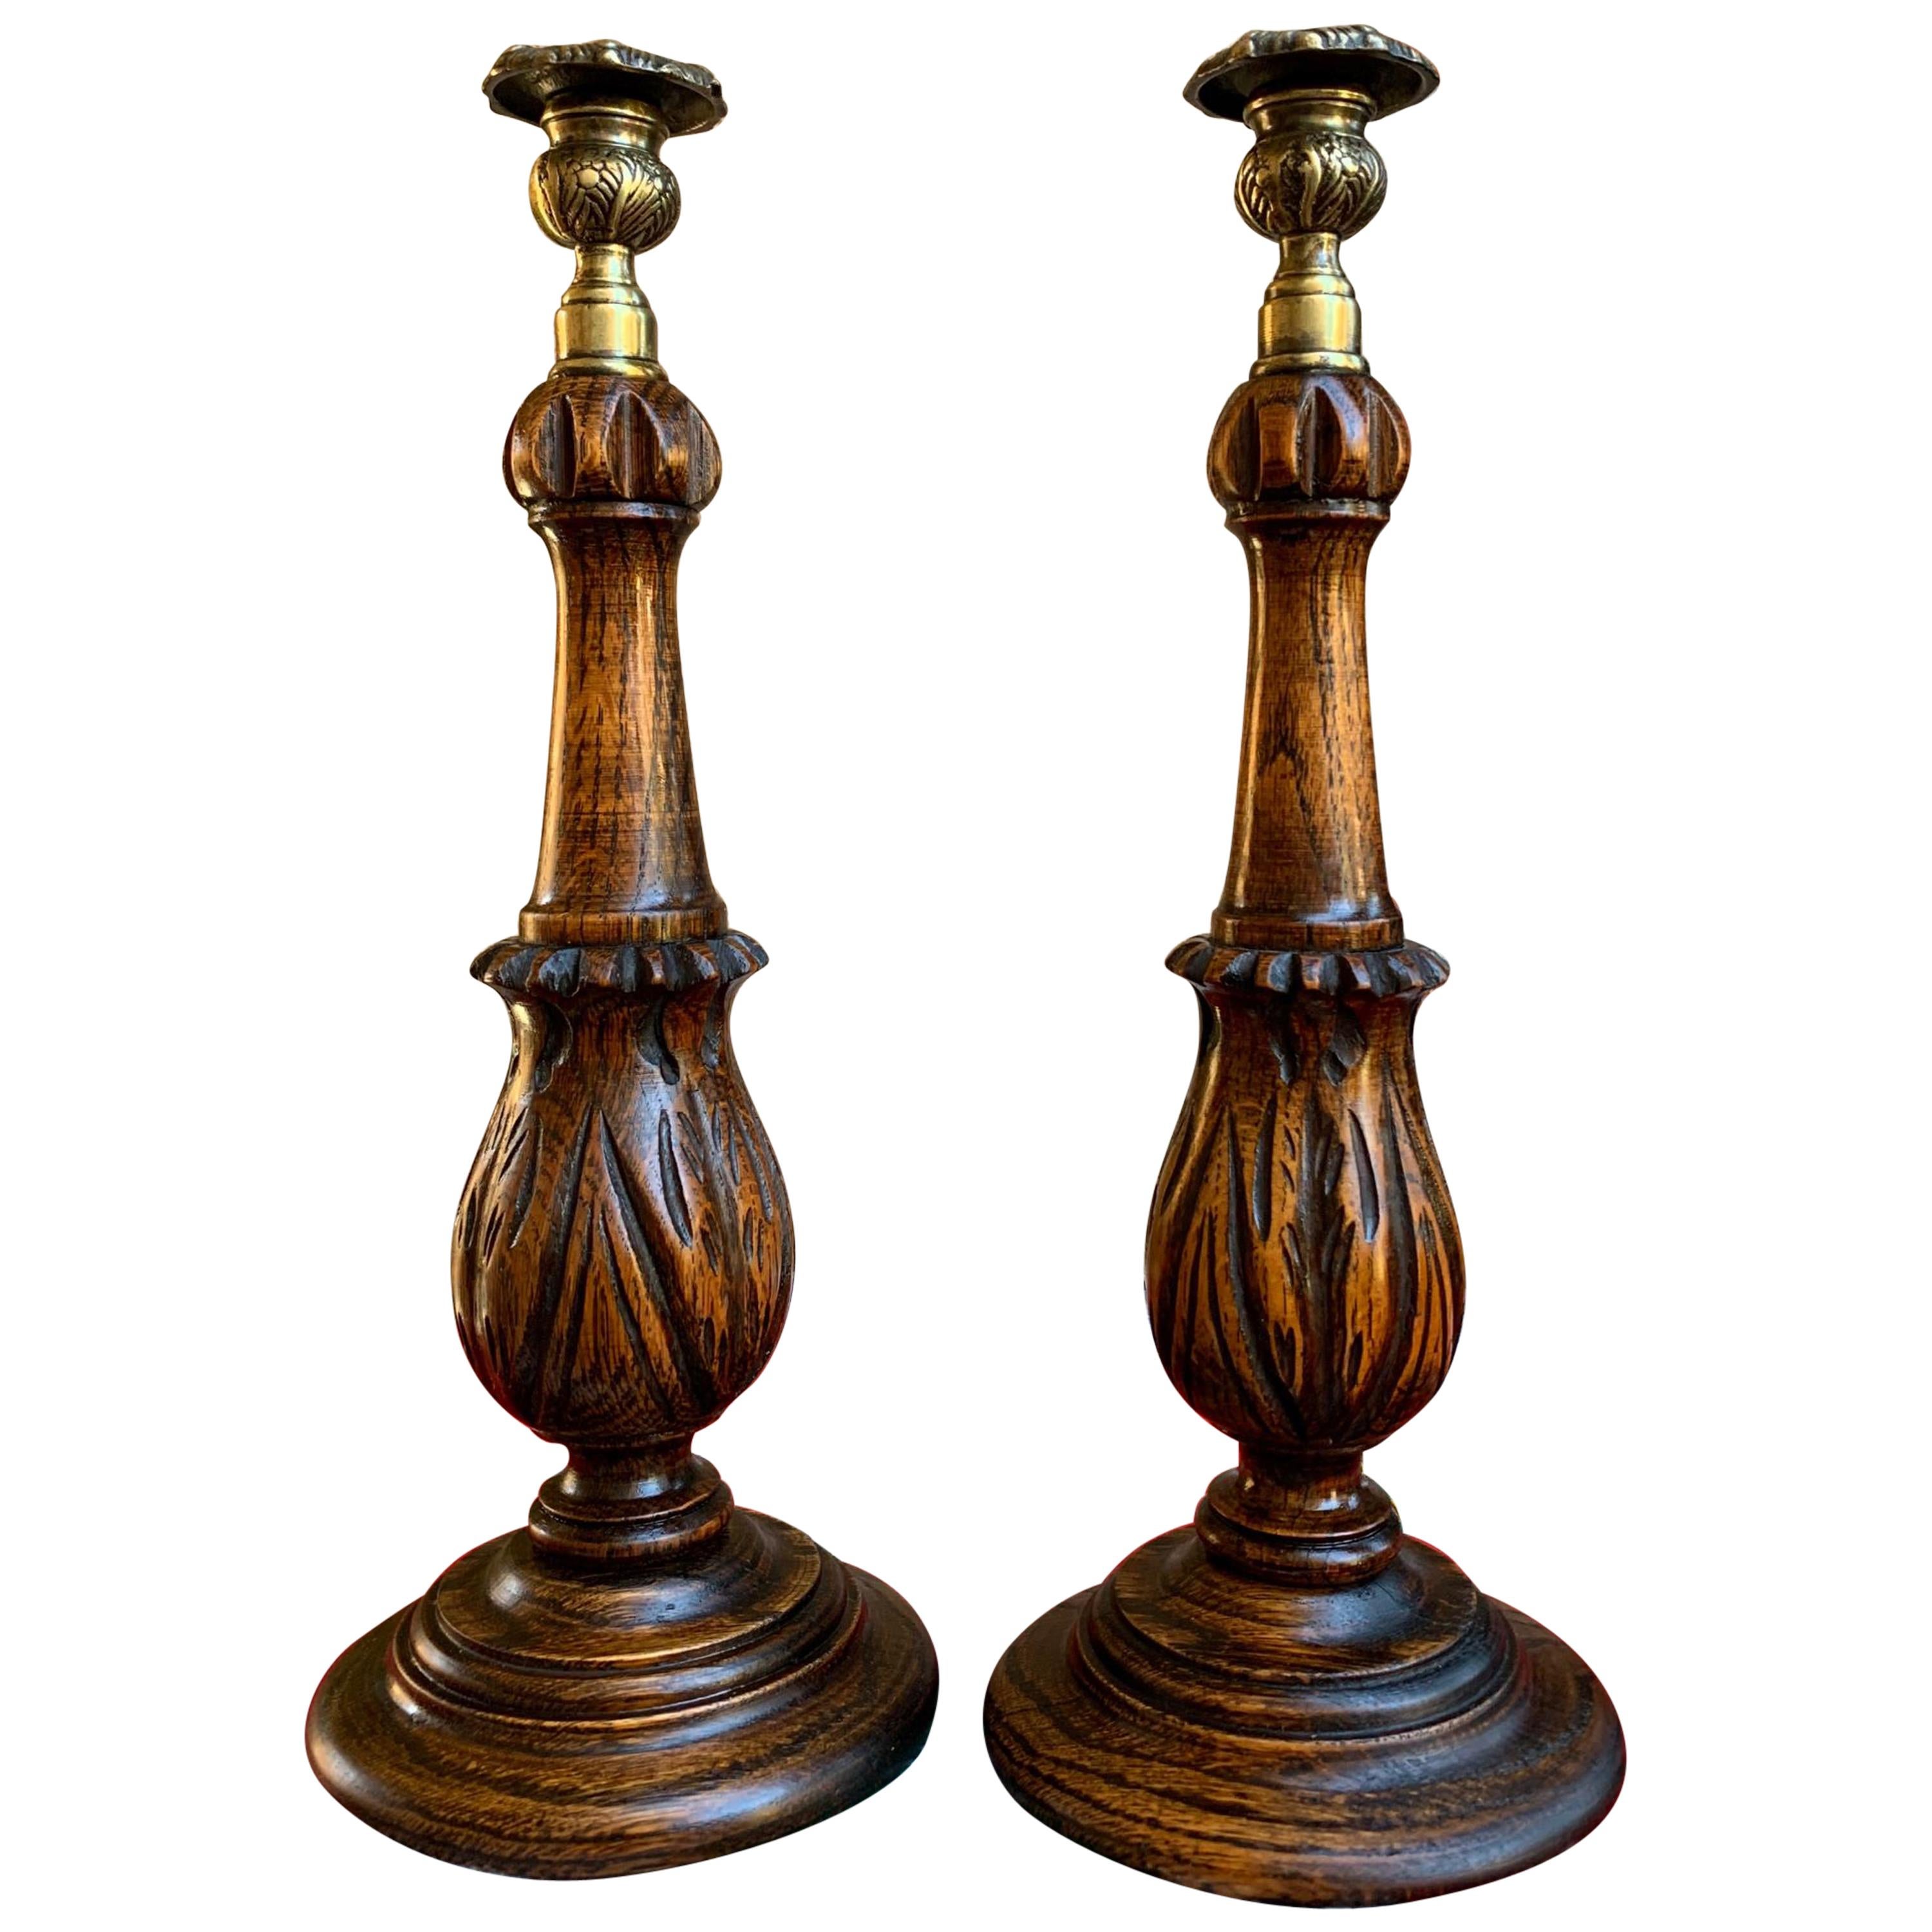 Pair of Antique English Carved Tiger Oak Candlesticks Candleholder Brass Thistle